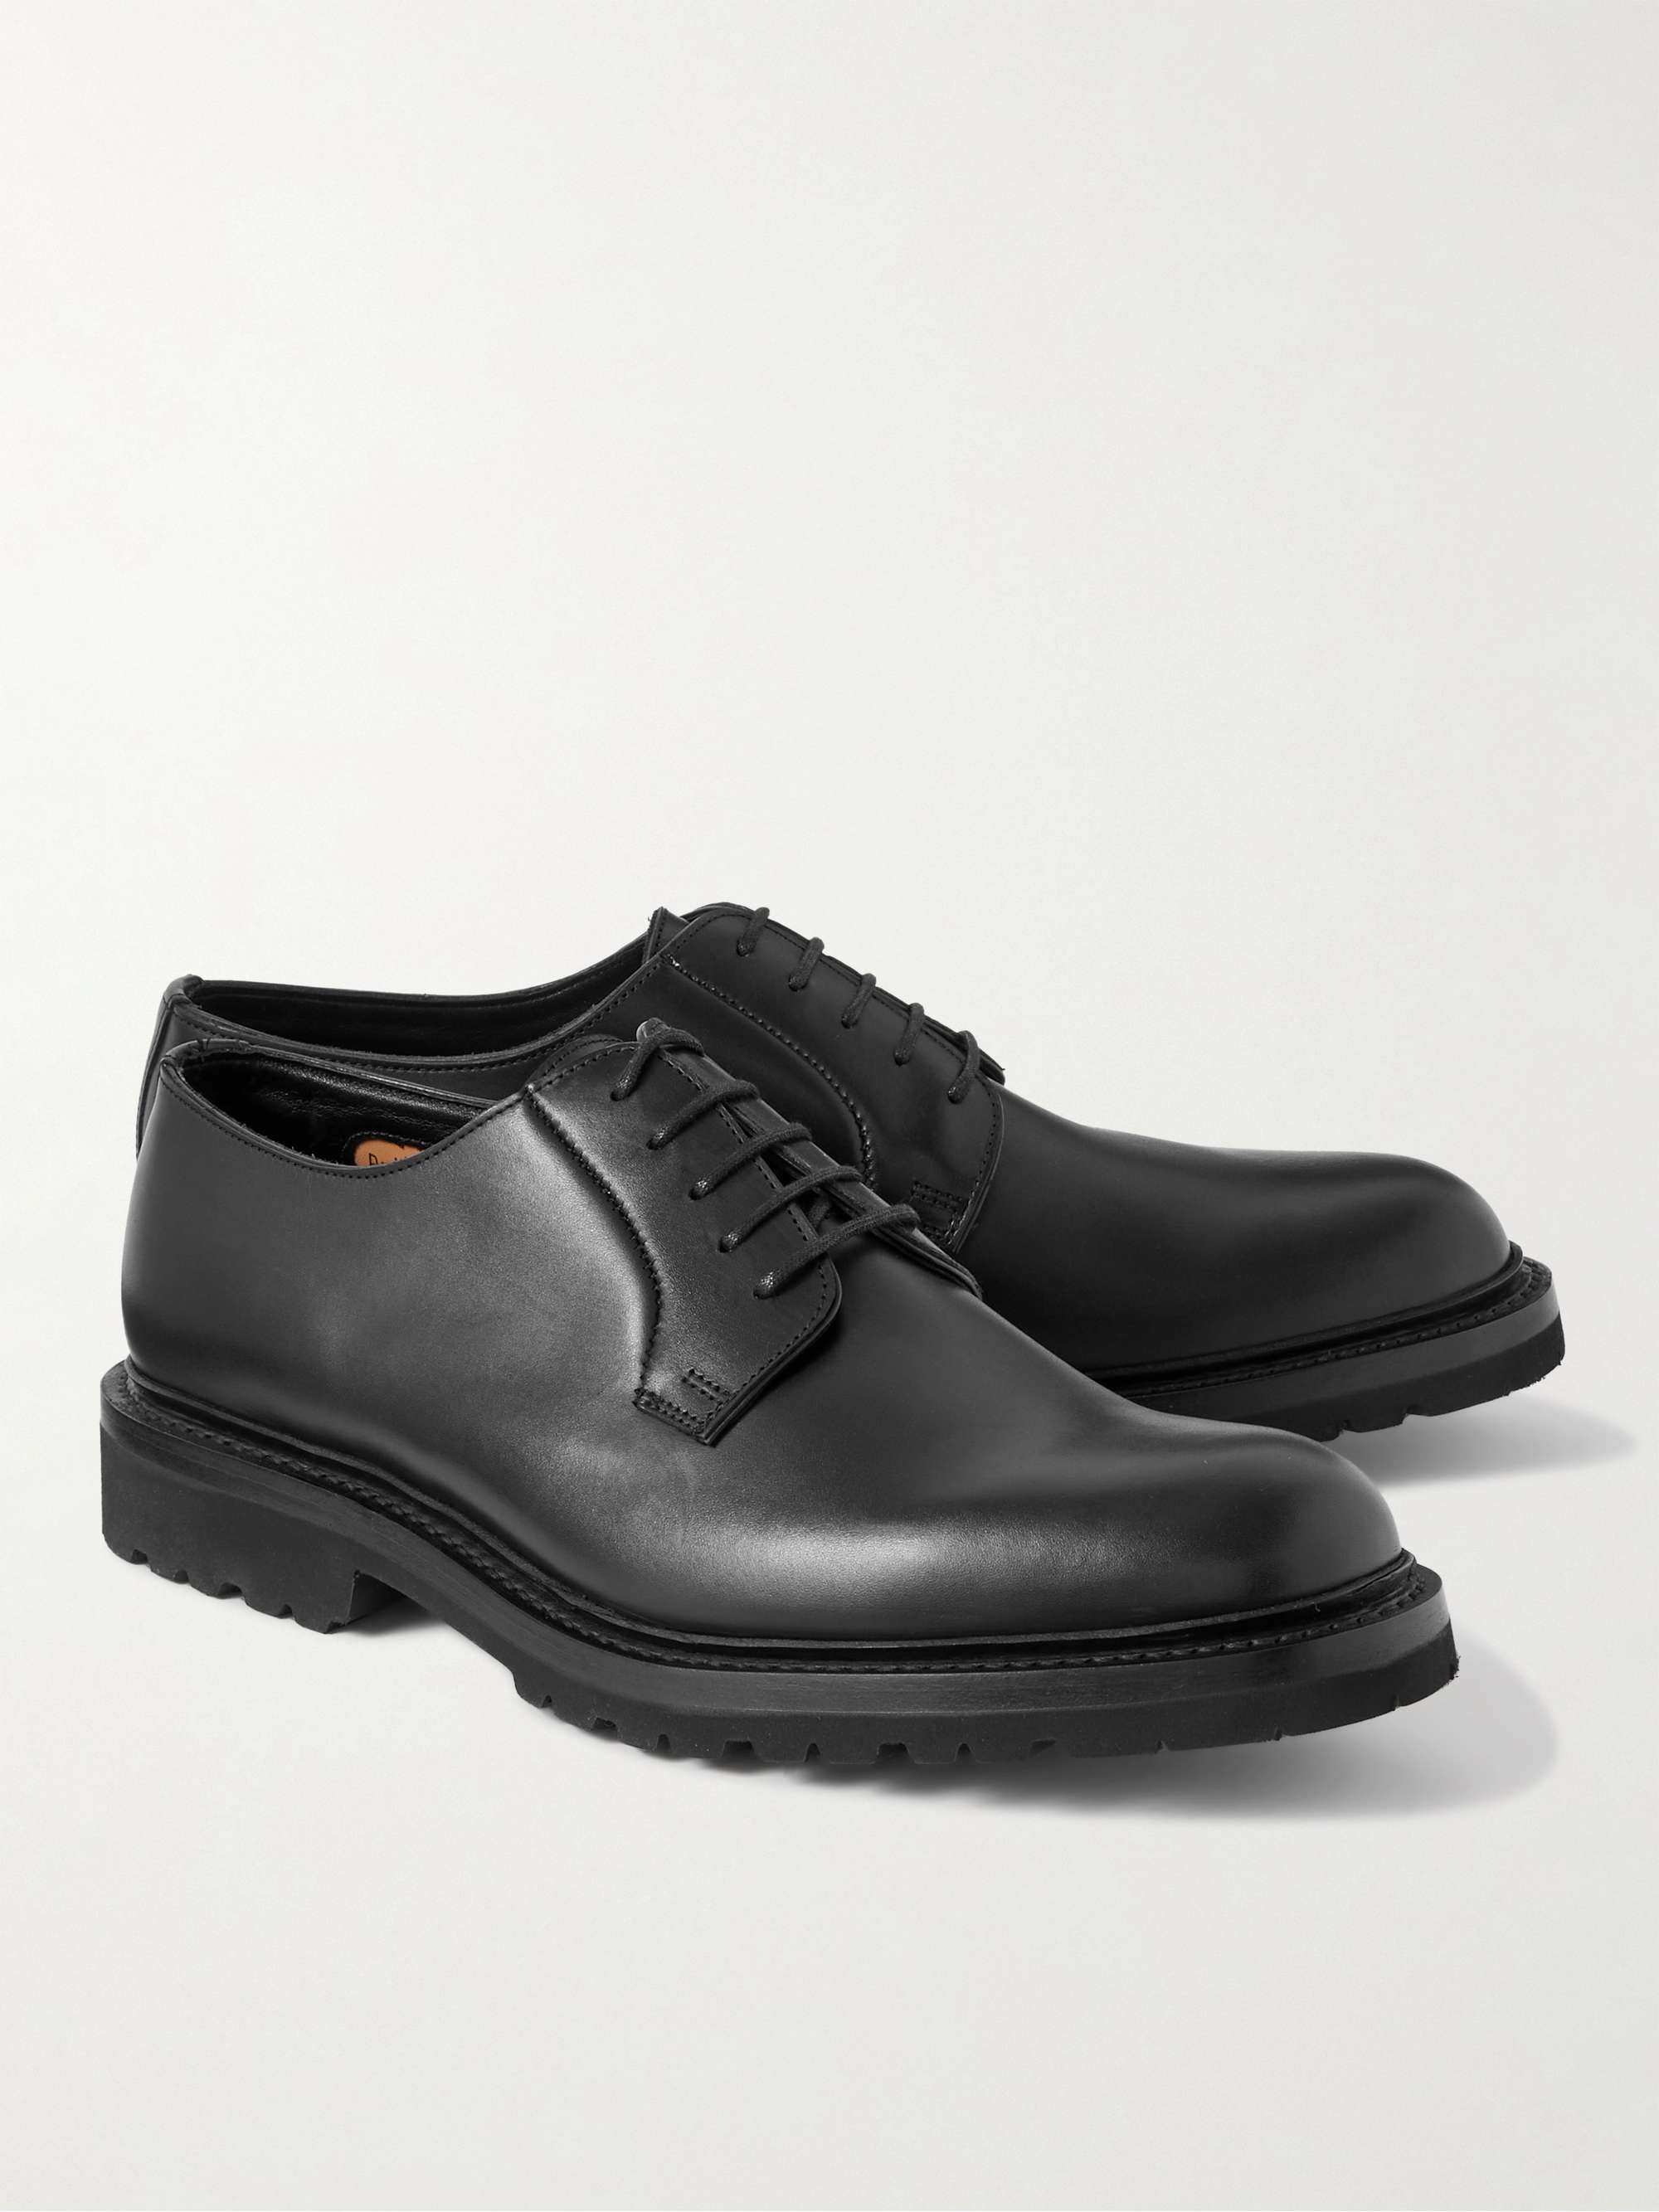 GEORGE CLEVERLEY Archie Leather Derby Shoes for Men | MR PORTER